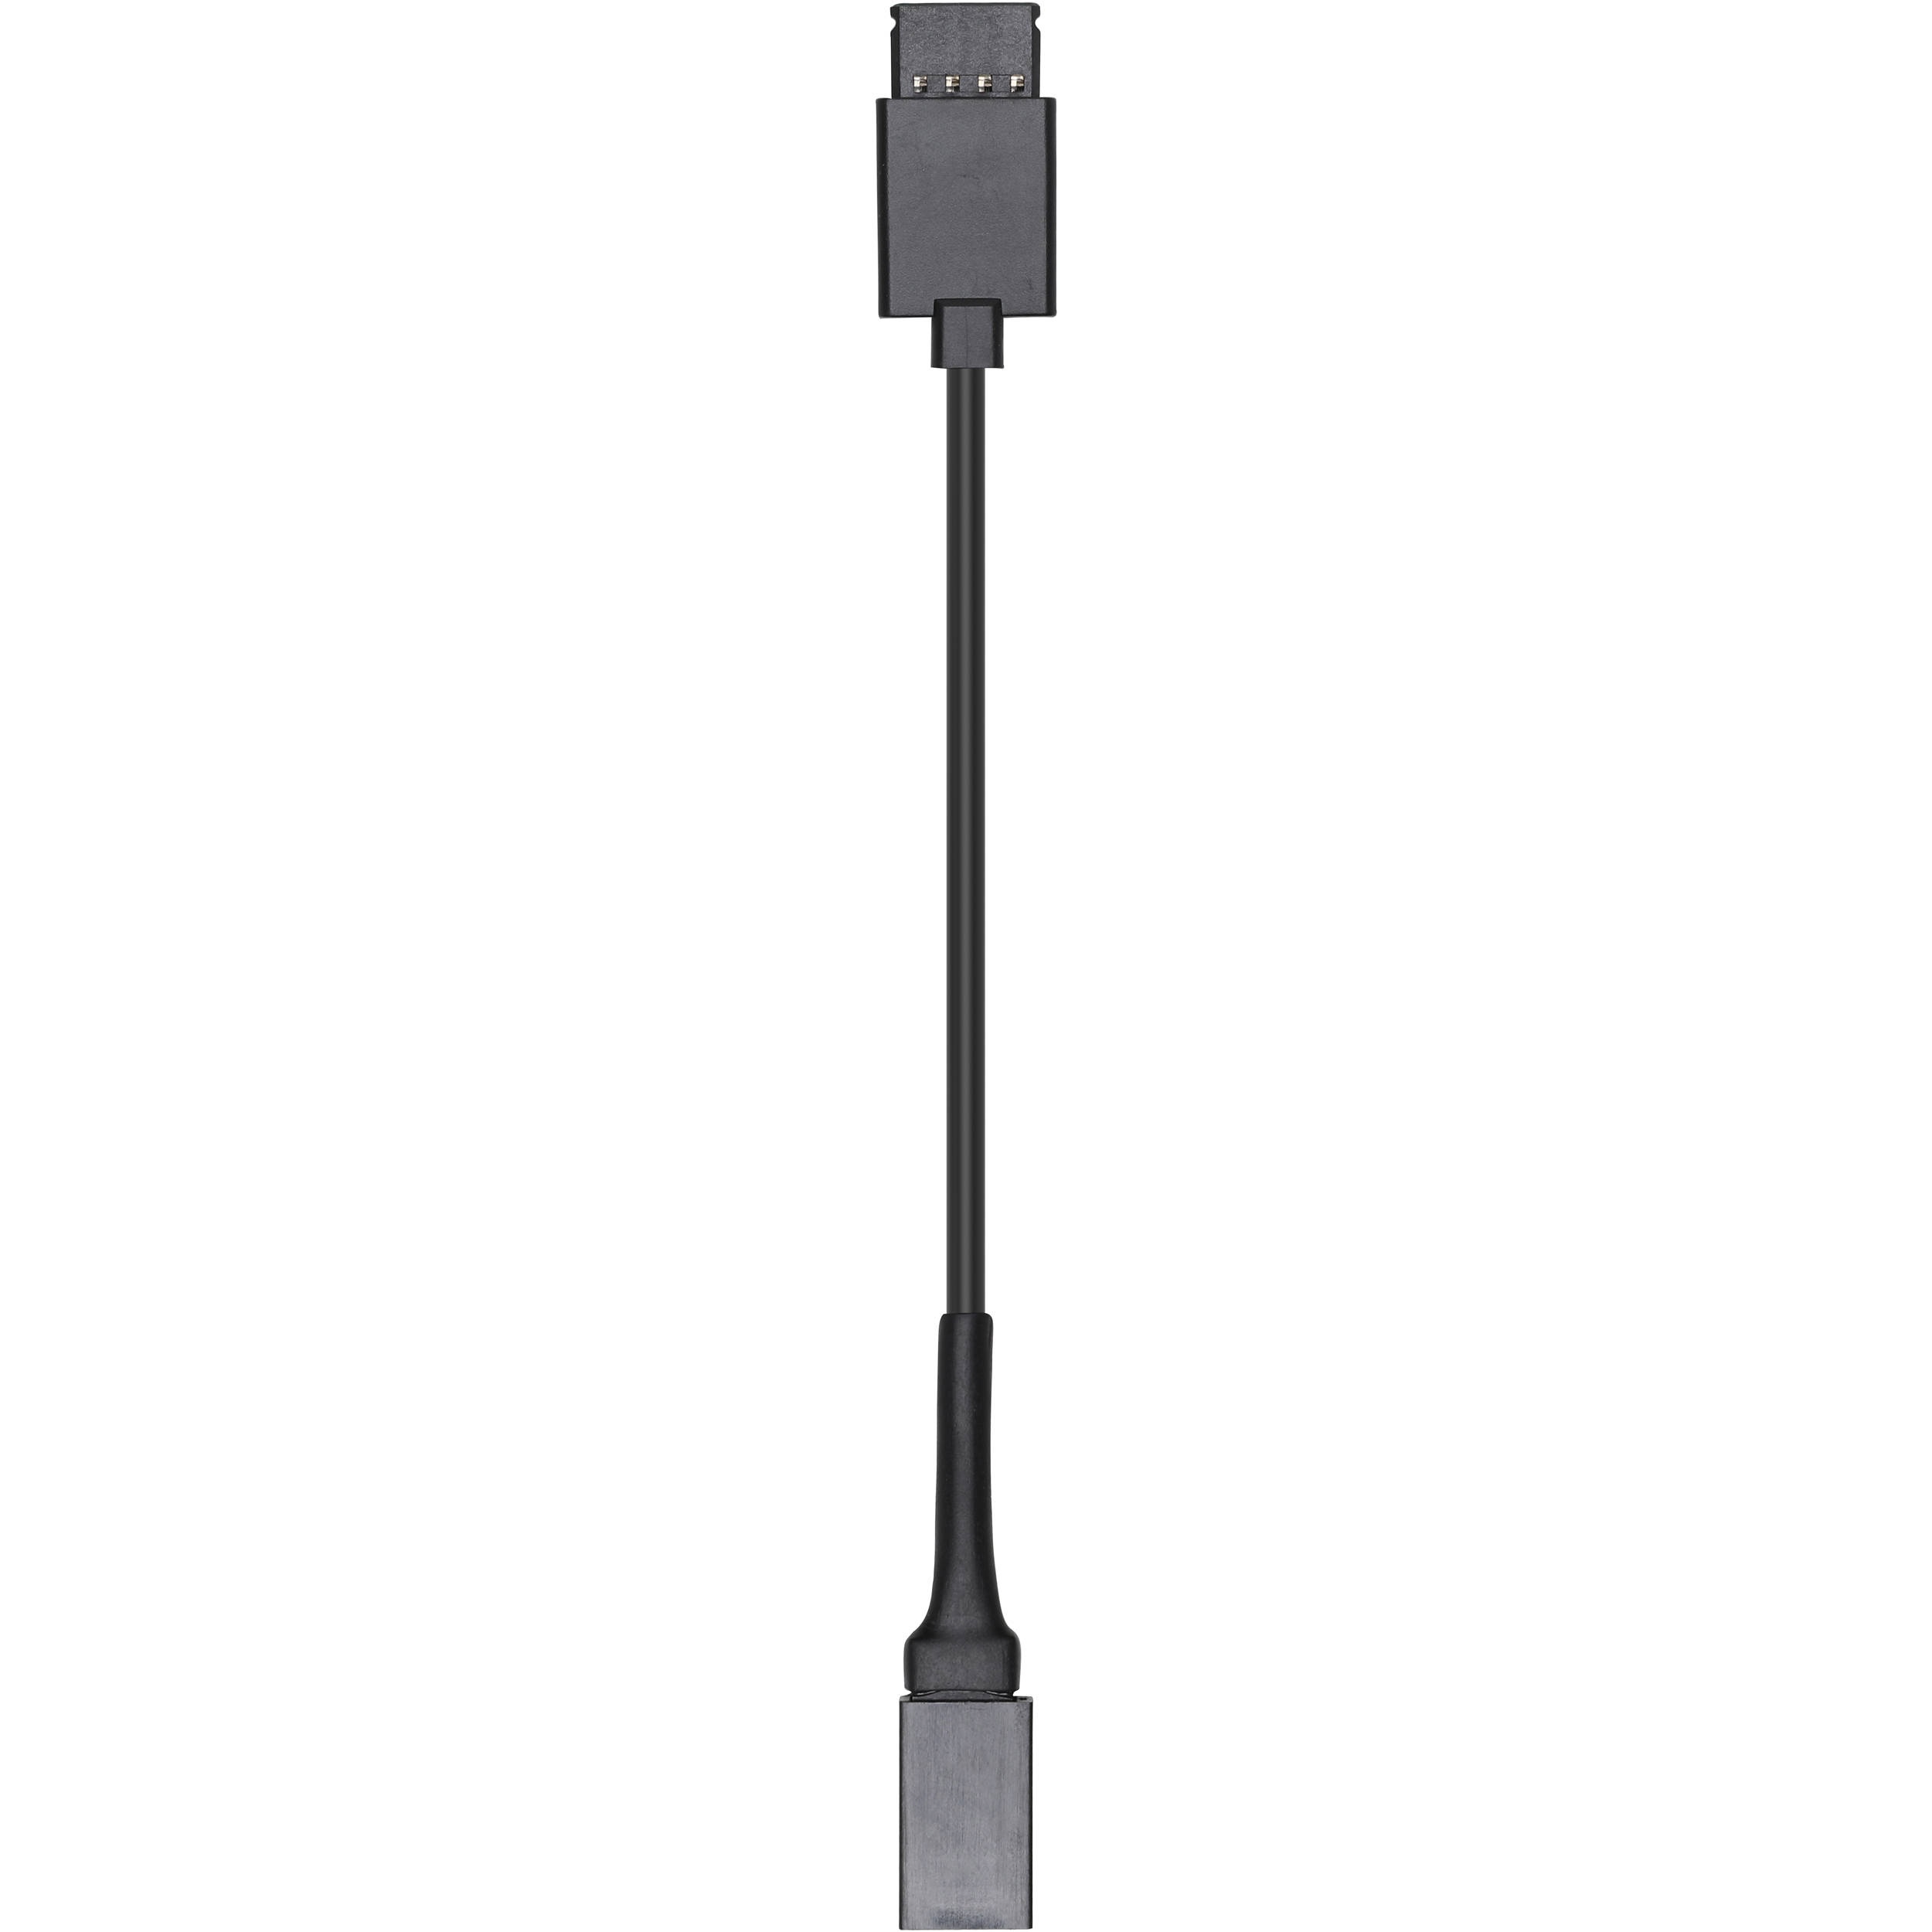 DJI UART to D-Bus Cable for Ronin 2 (10cm)